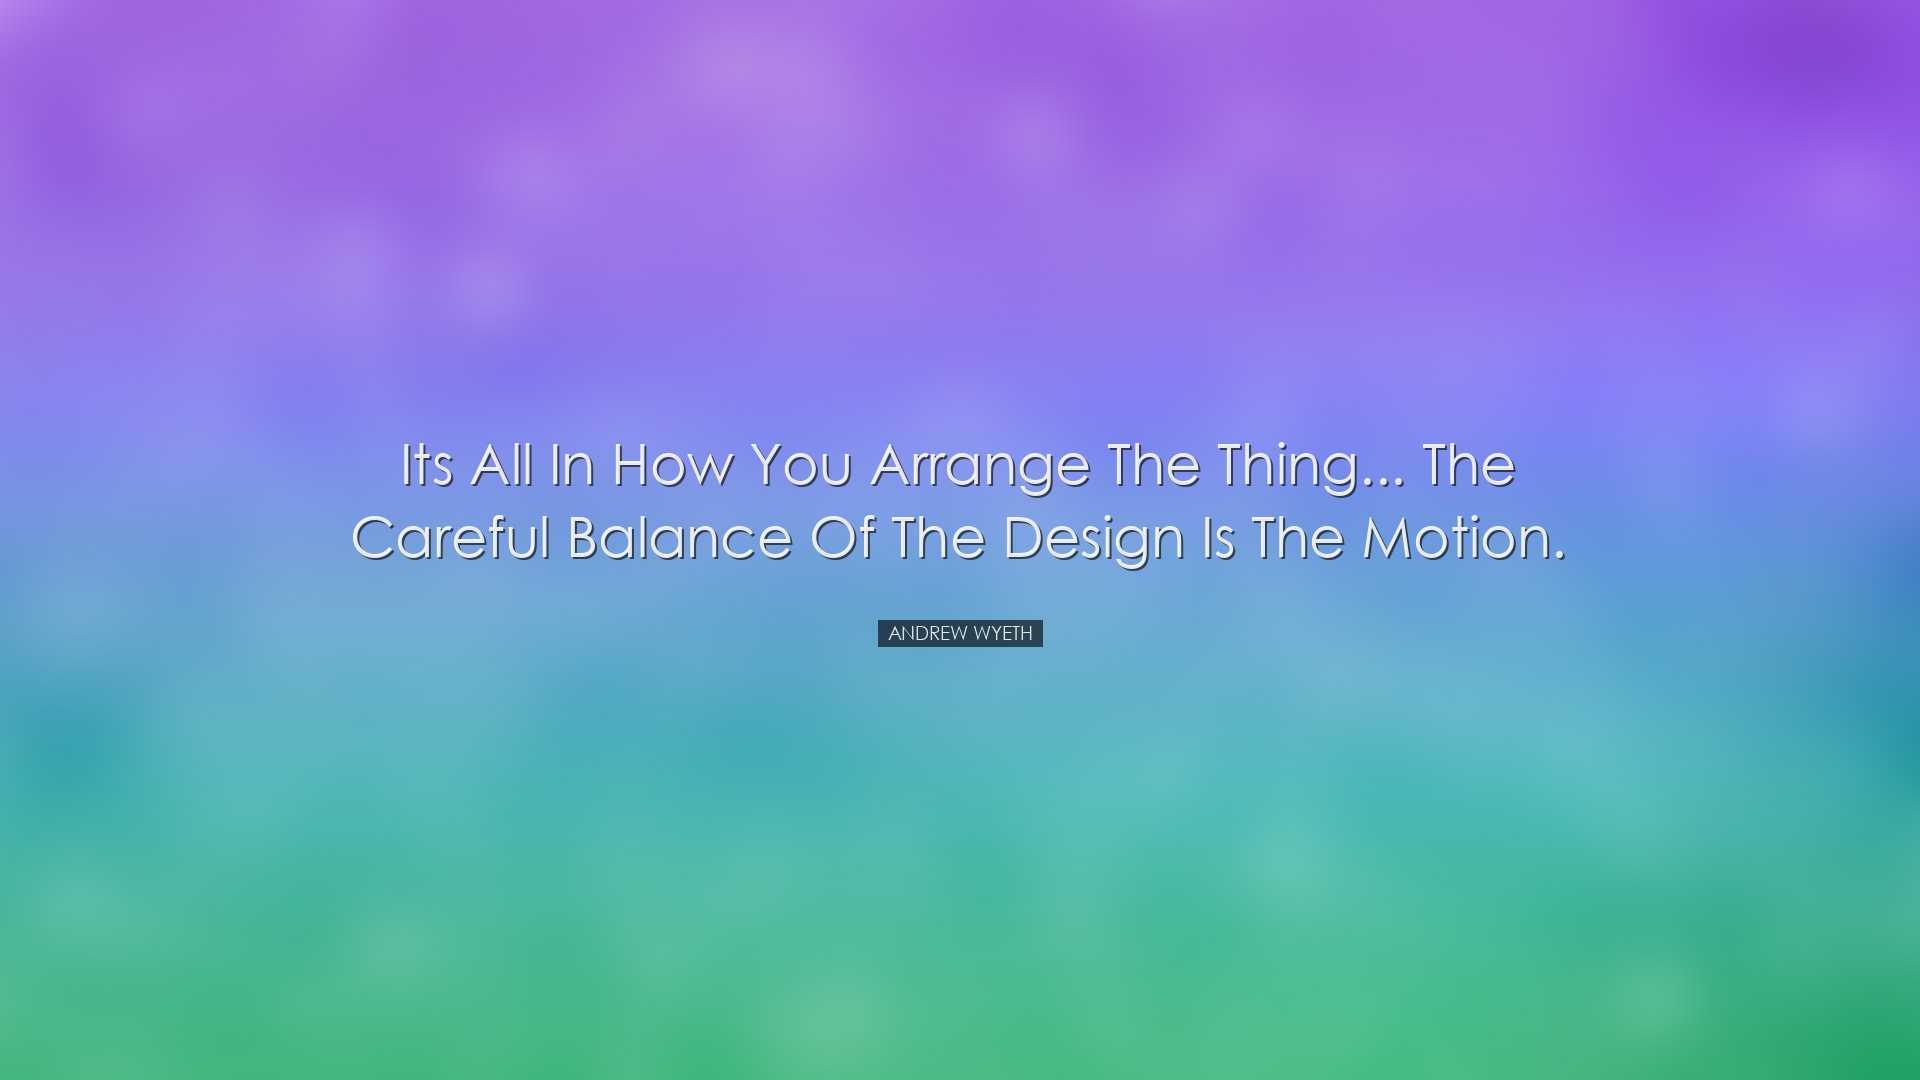 Its all in how you arrange the thing... the careful balance of the